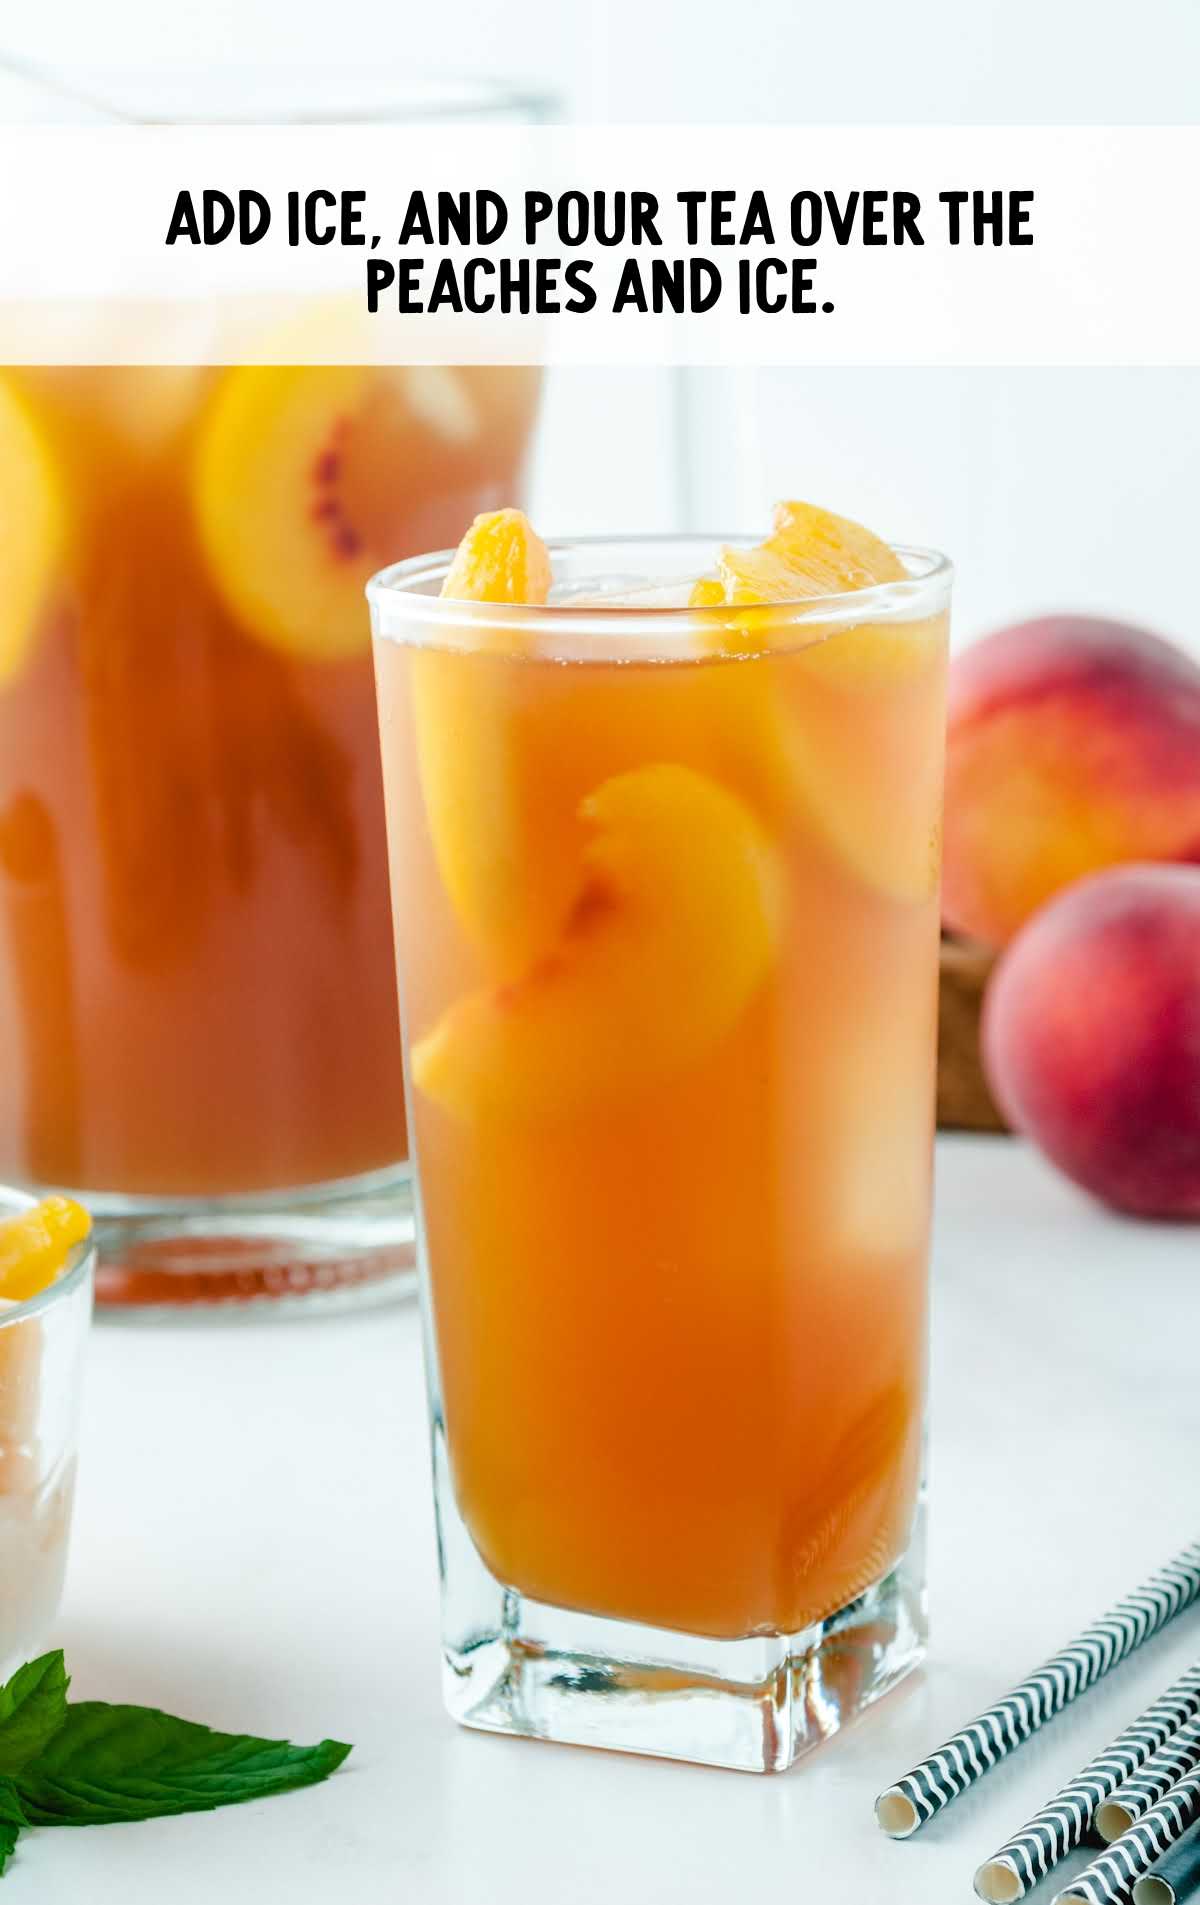 ice added and tea poured over the peaches and ice in a tall glass